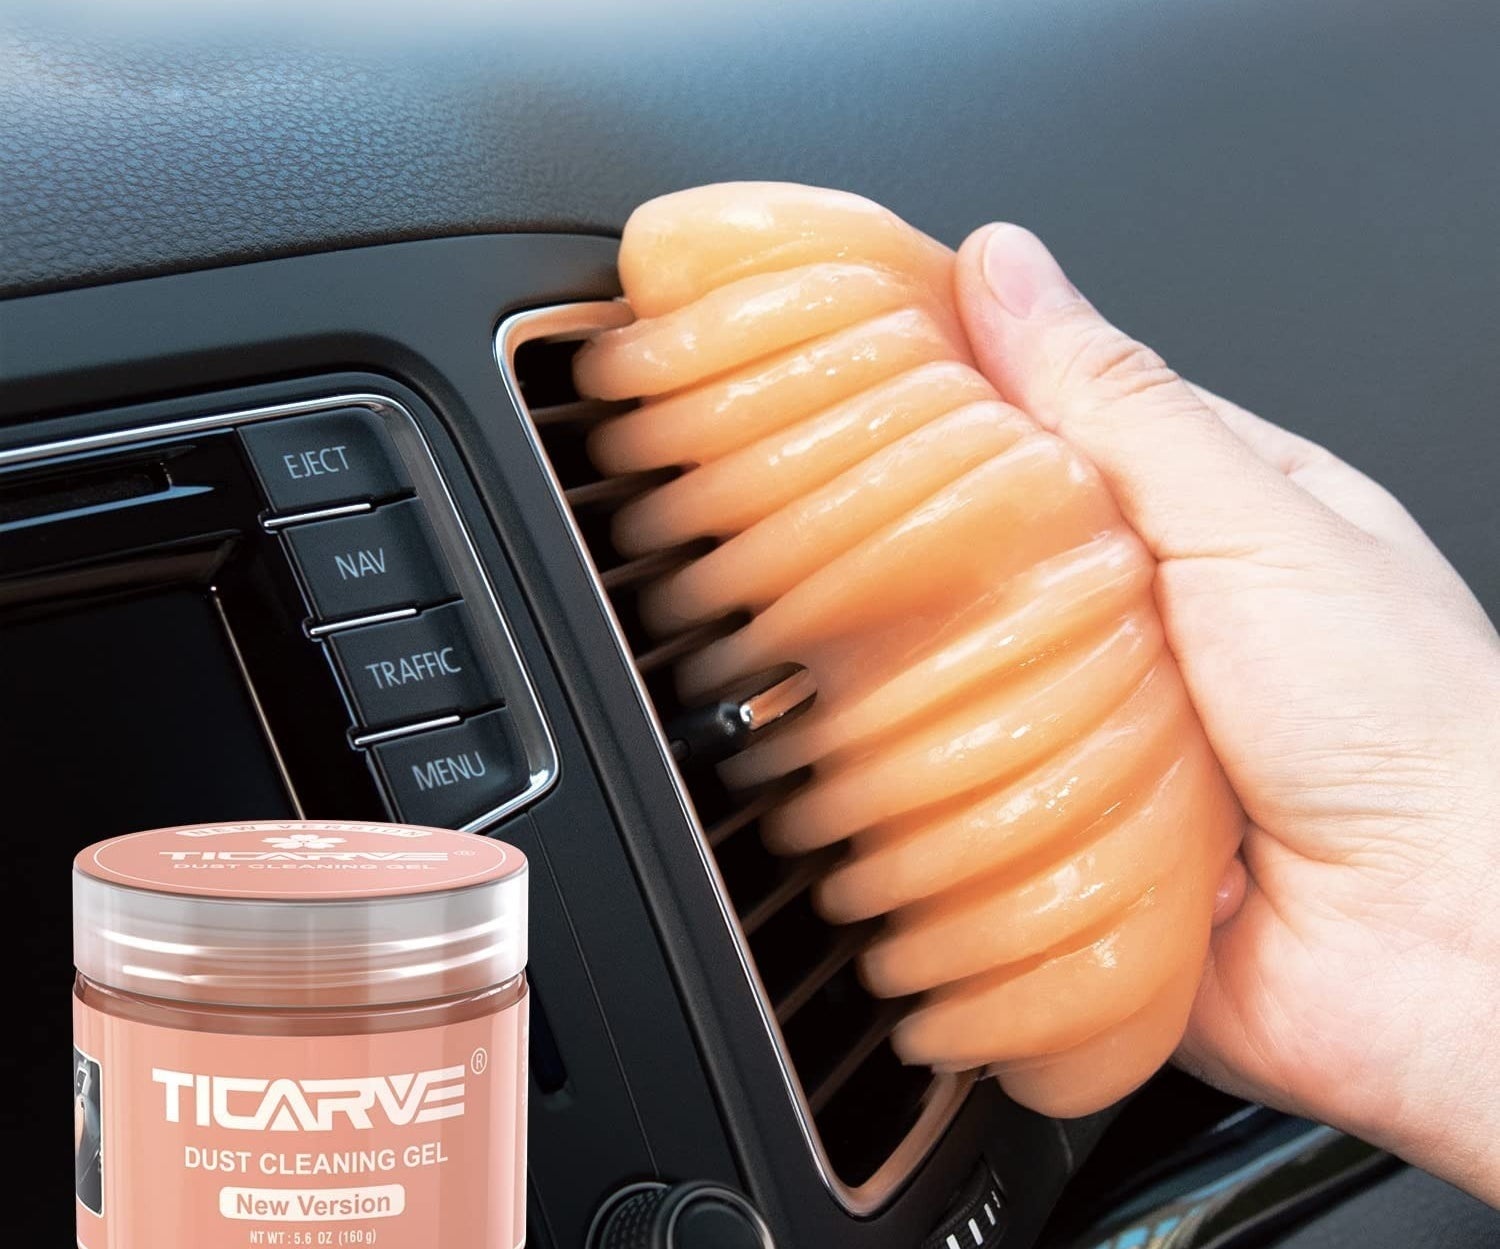 the orange putty being used to clean an AC car vent